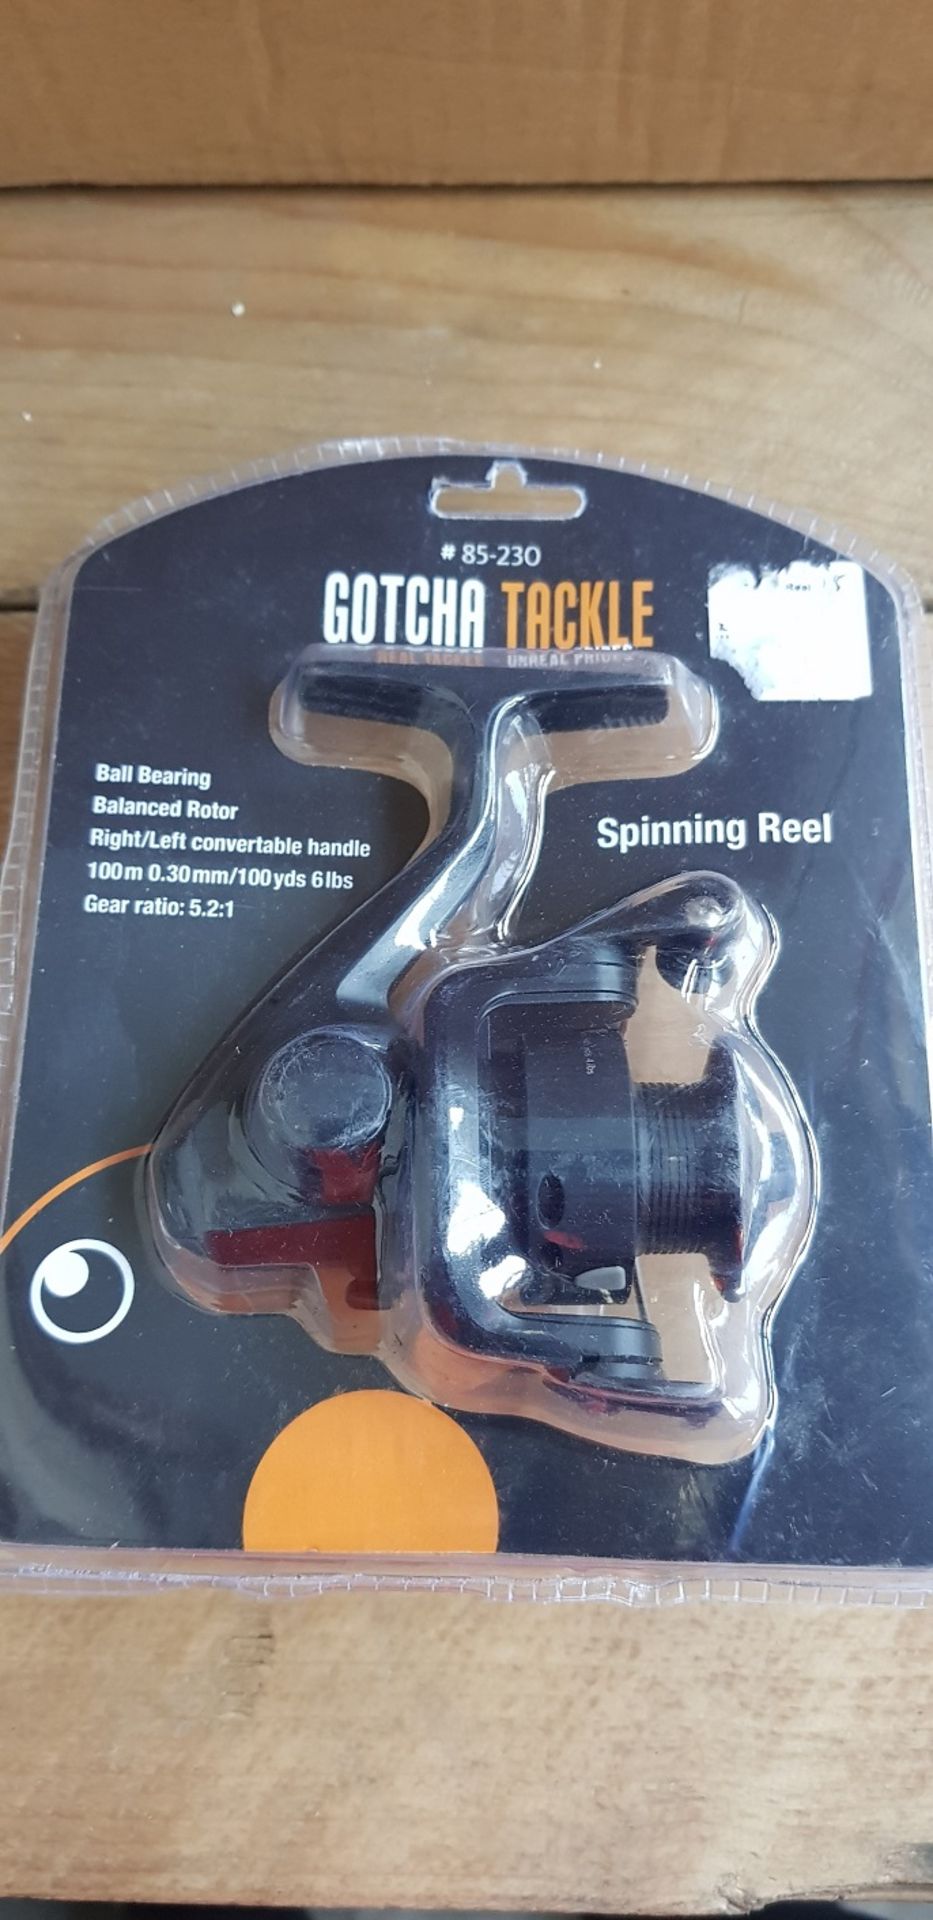 1 BRAND NEW BOXED GOTCHA TACKLE SPINNING REEL (VIE